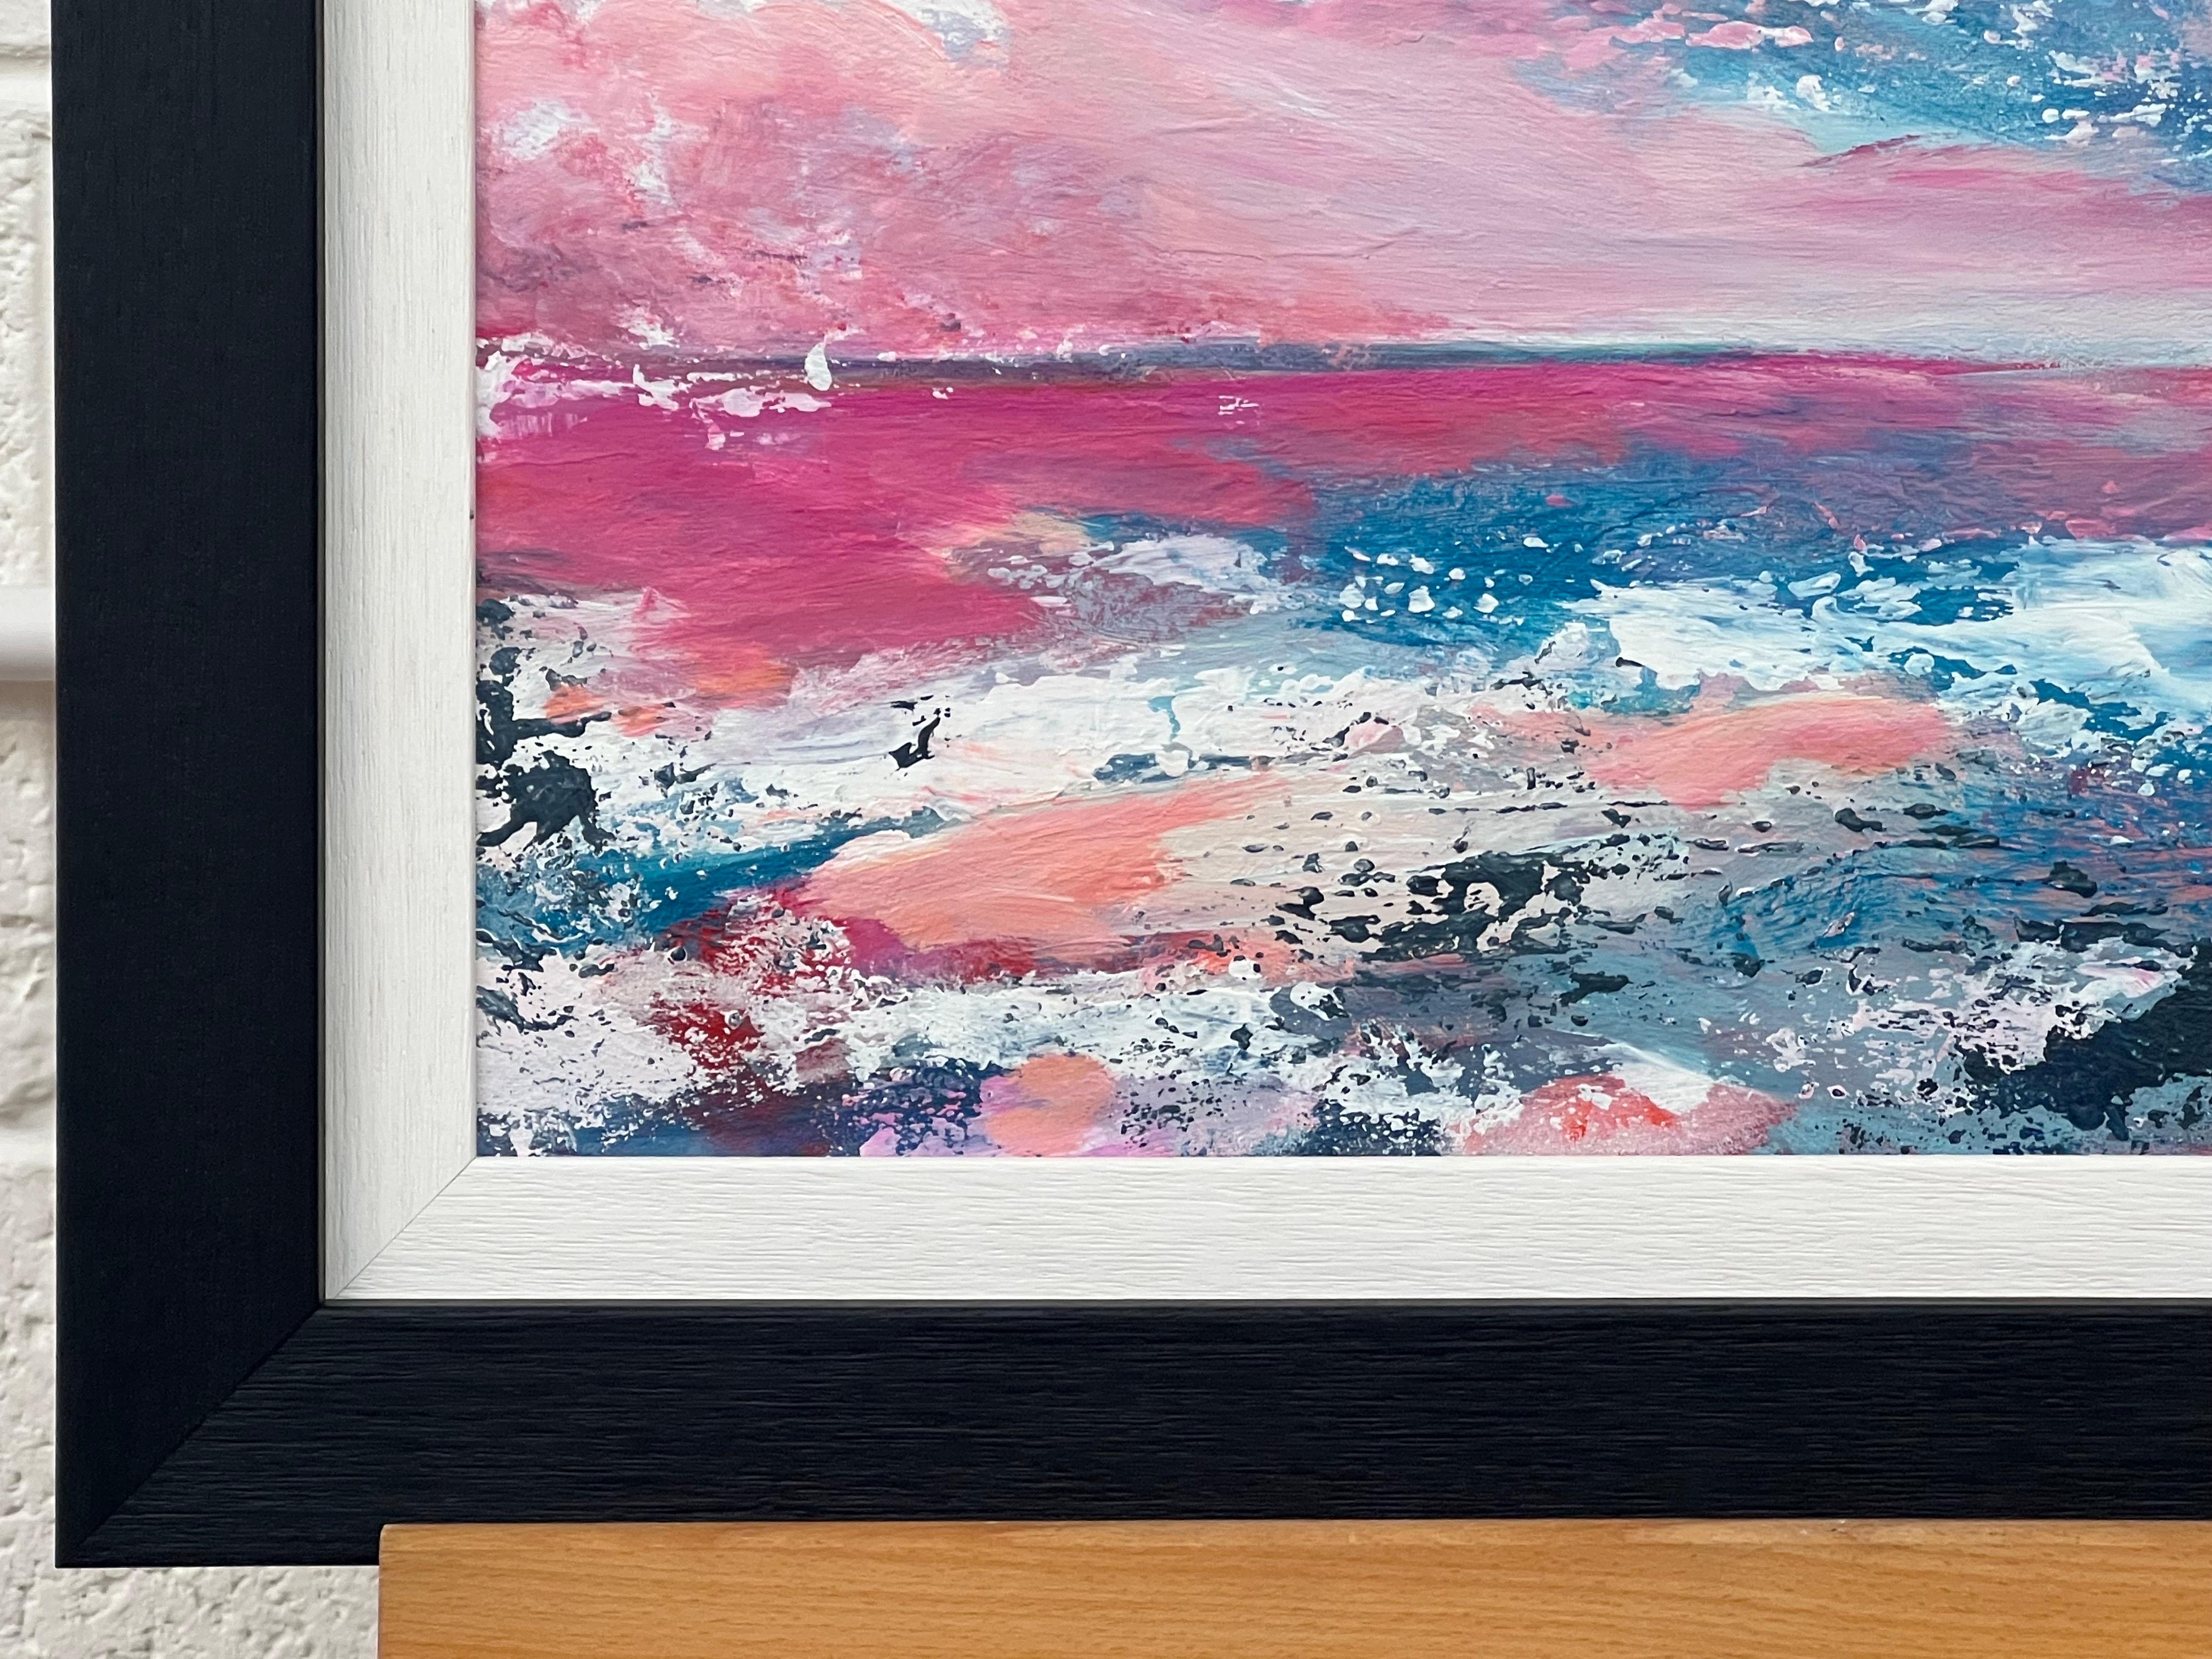 Abstract Landscape Seascape Painting with Pink & Blue Sky by British Artist For Sale 5